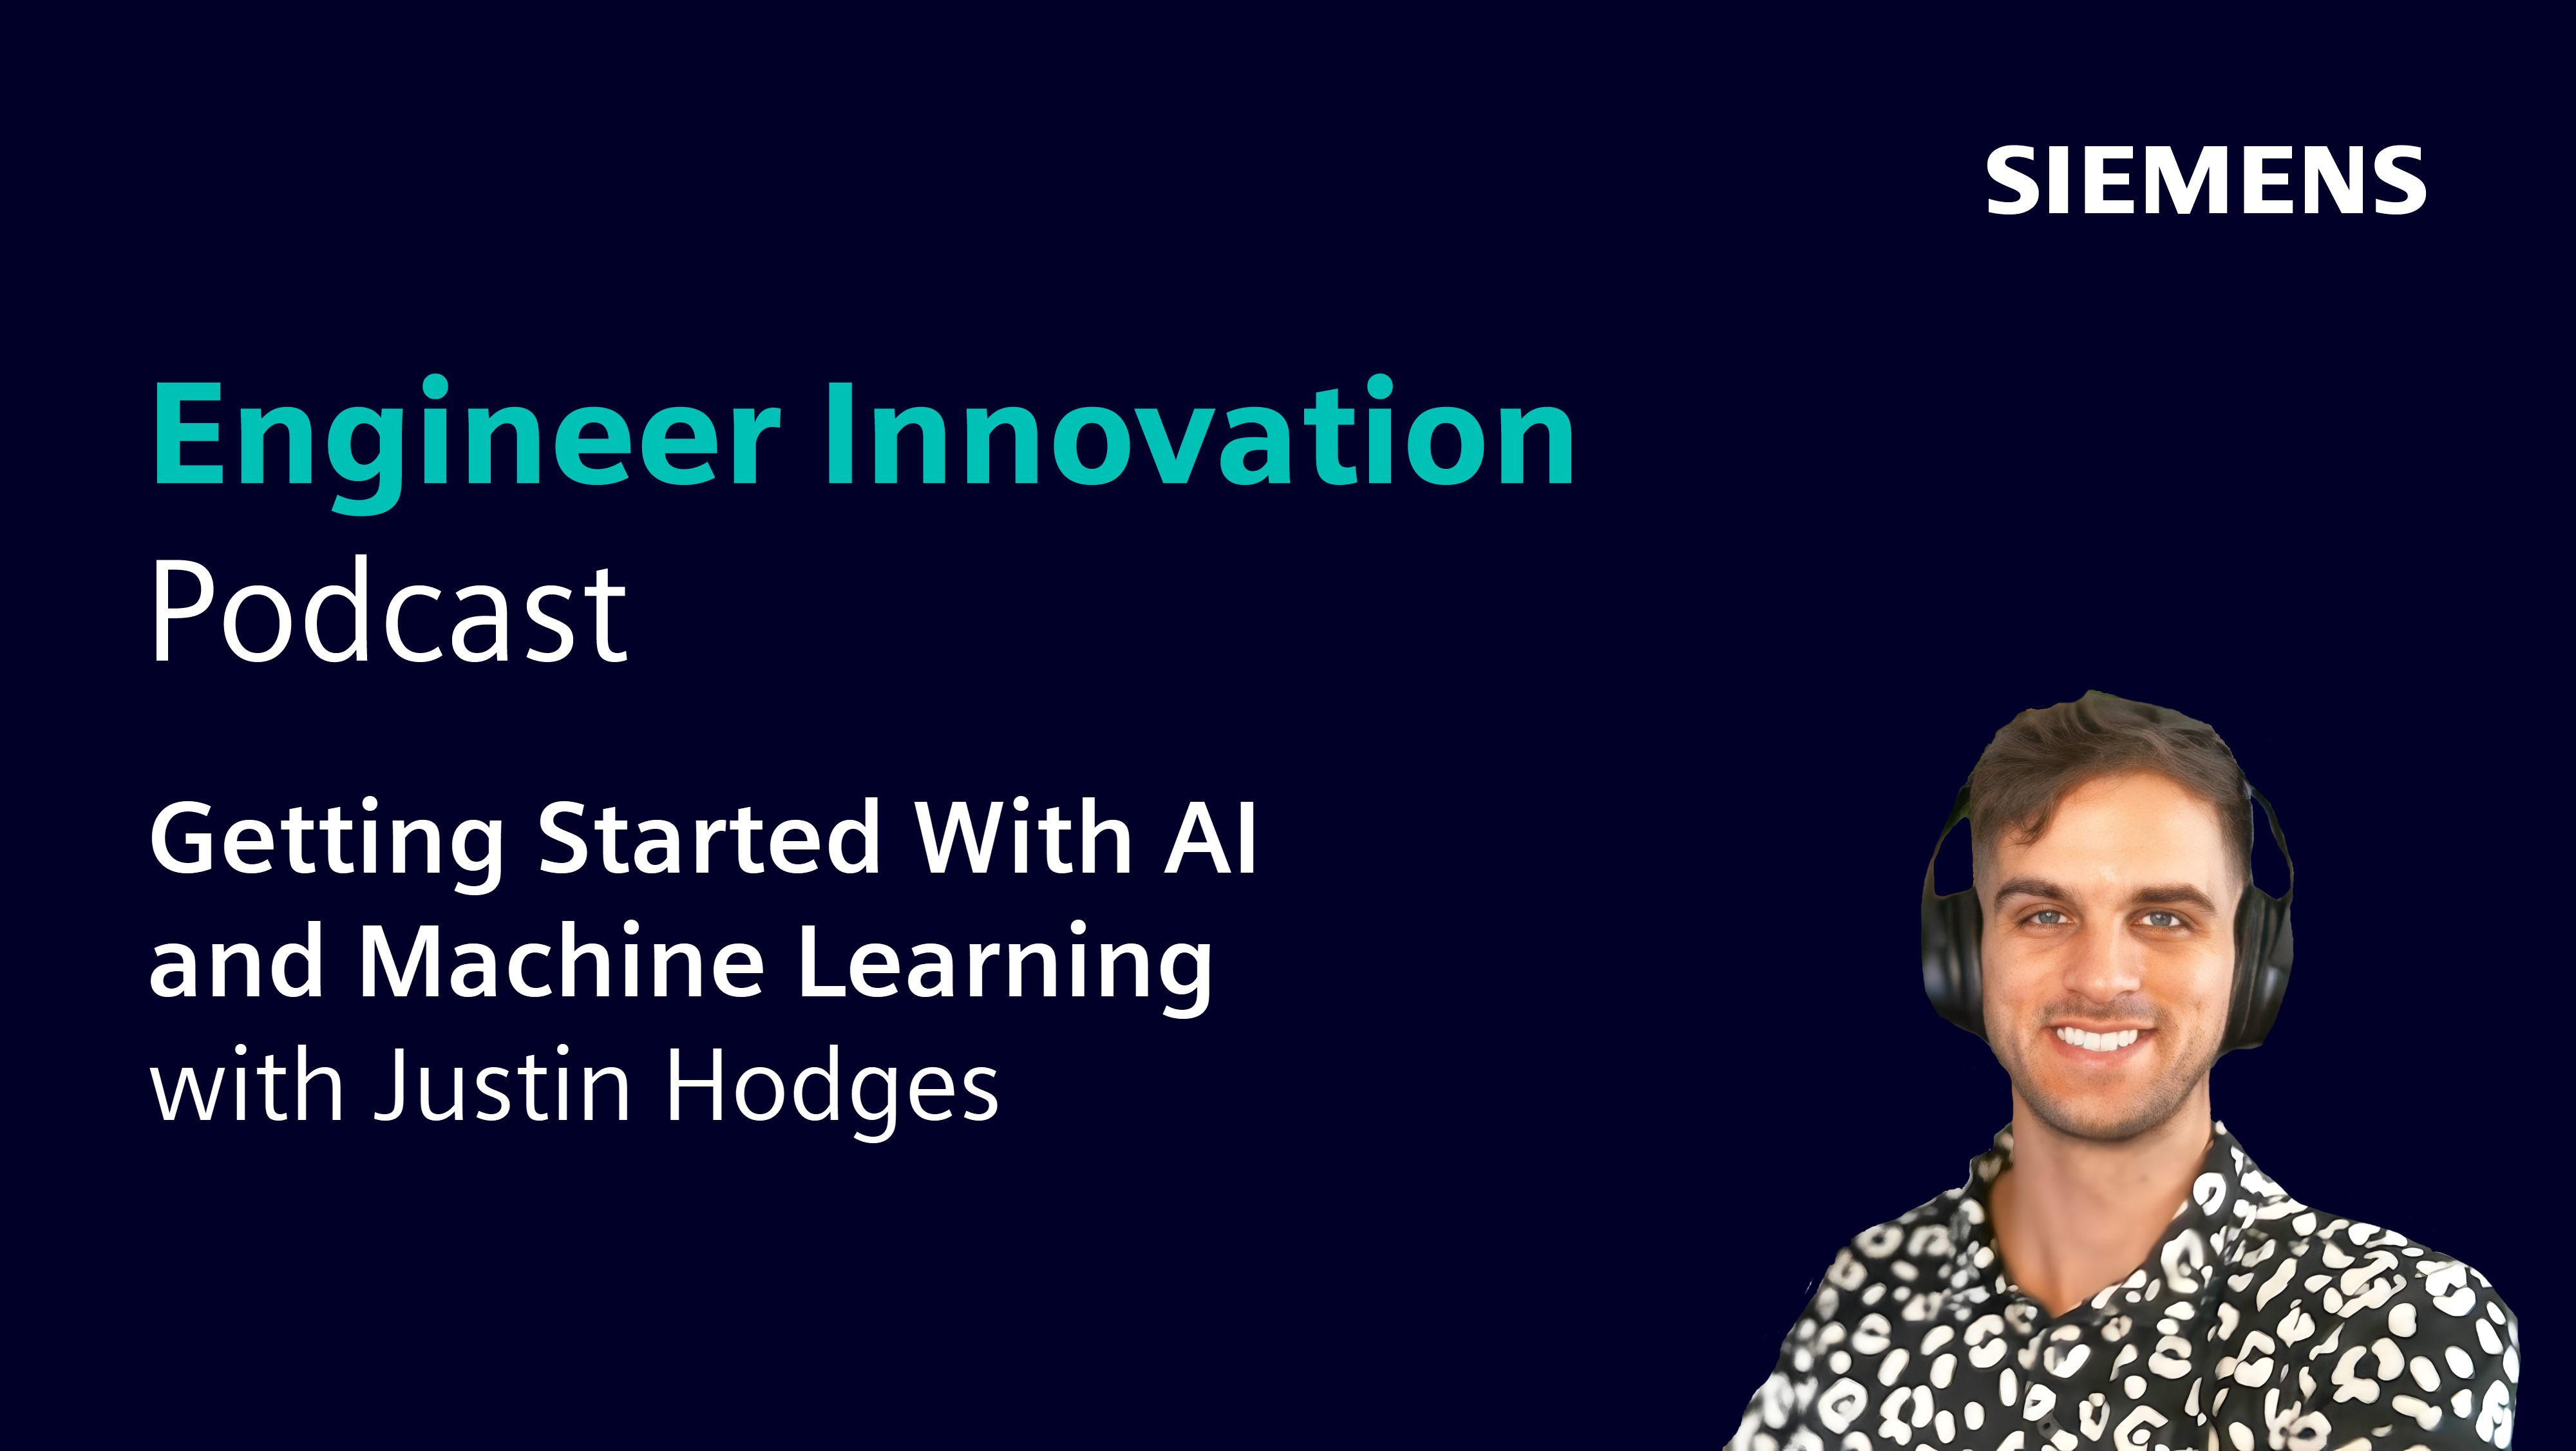 Getting Started in AI and Machine Learning with Justin Hodges